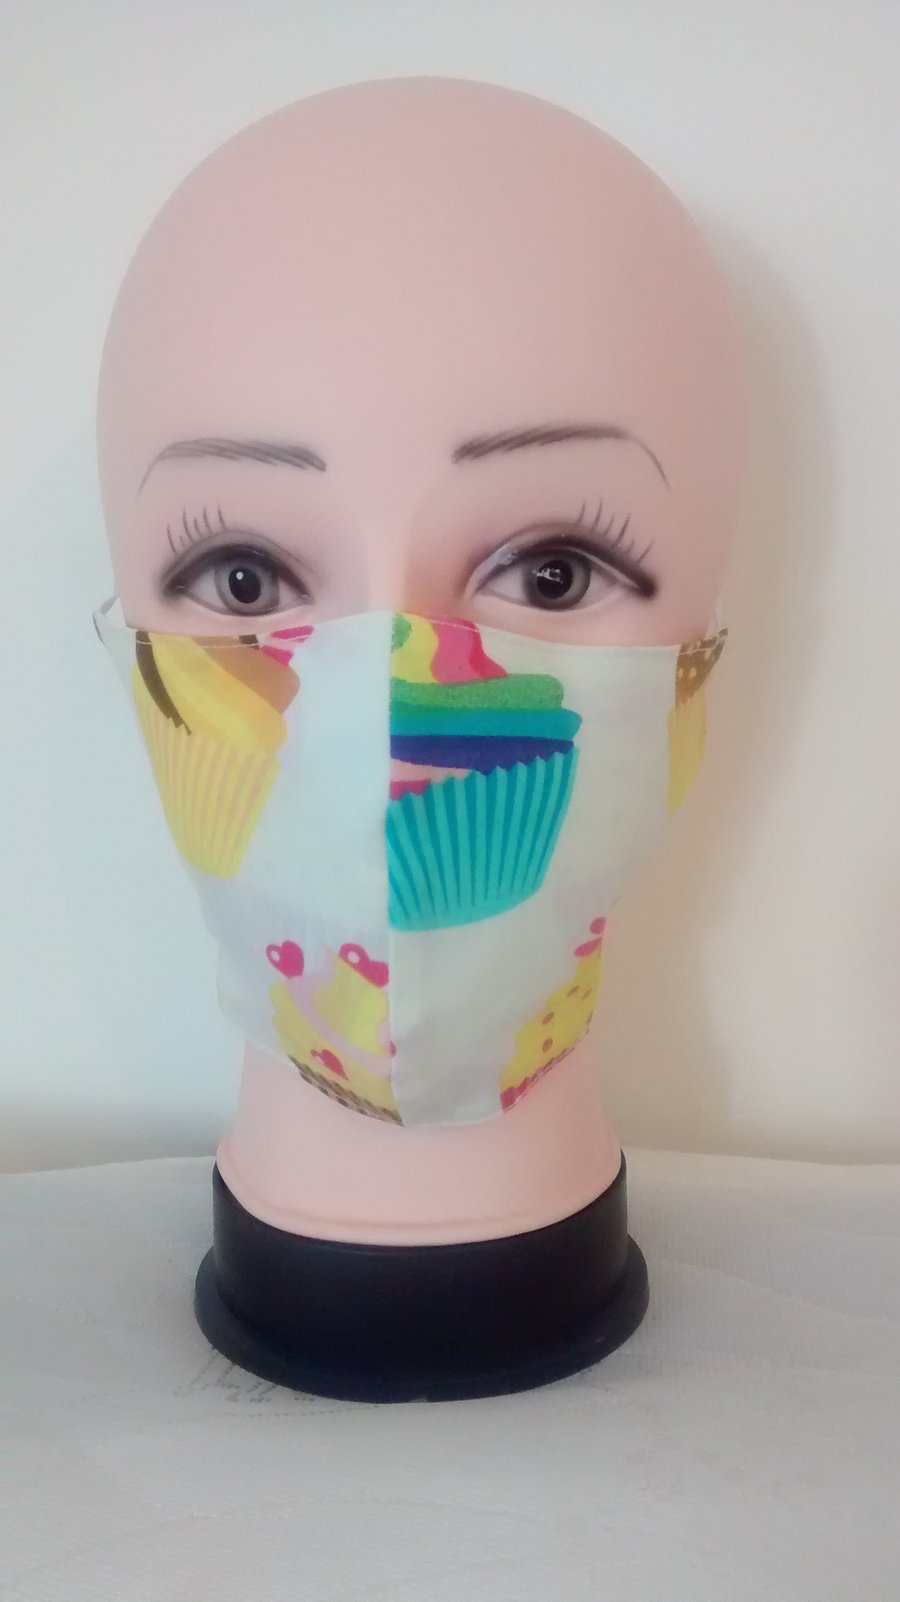 Handmade 3 layers cupcakes adult face mask.